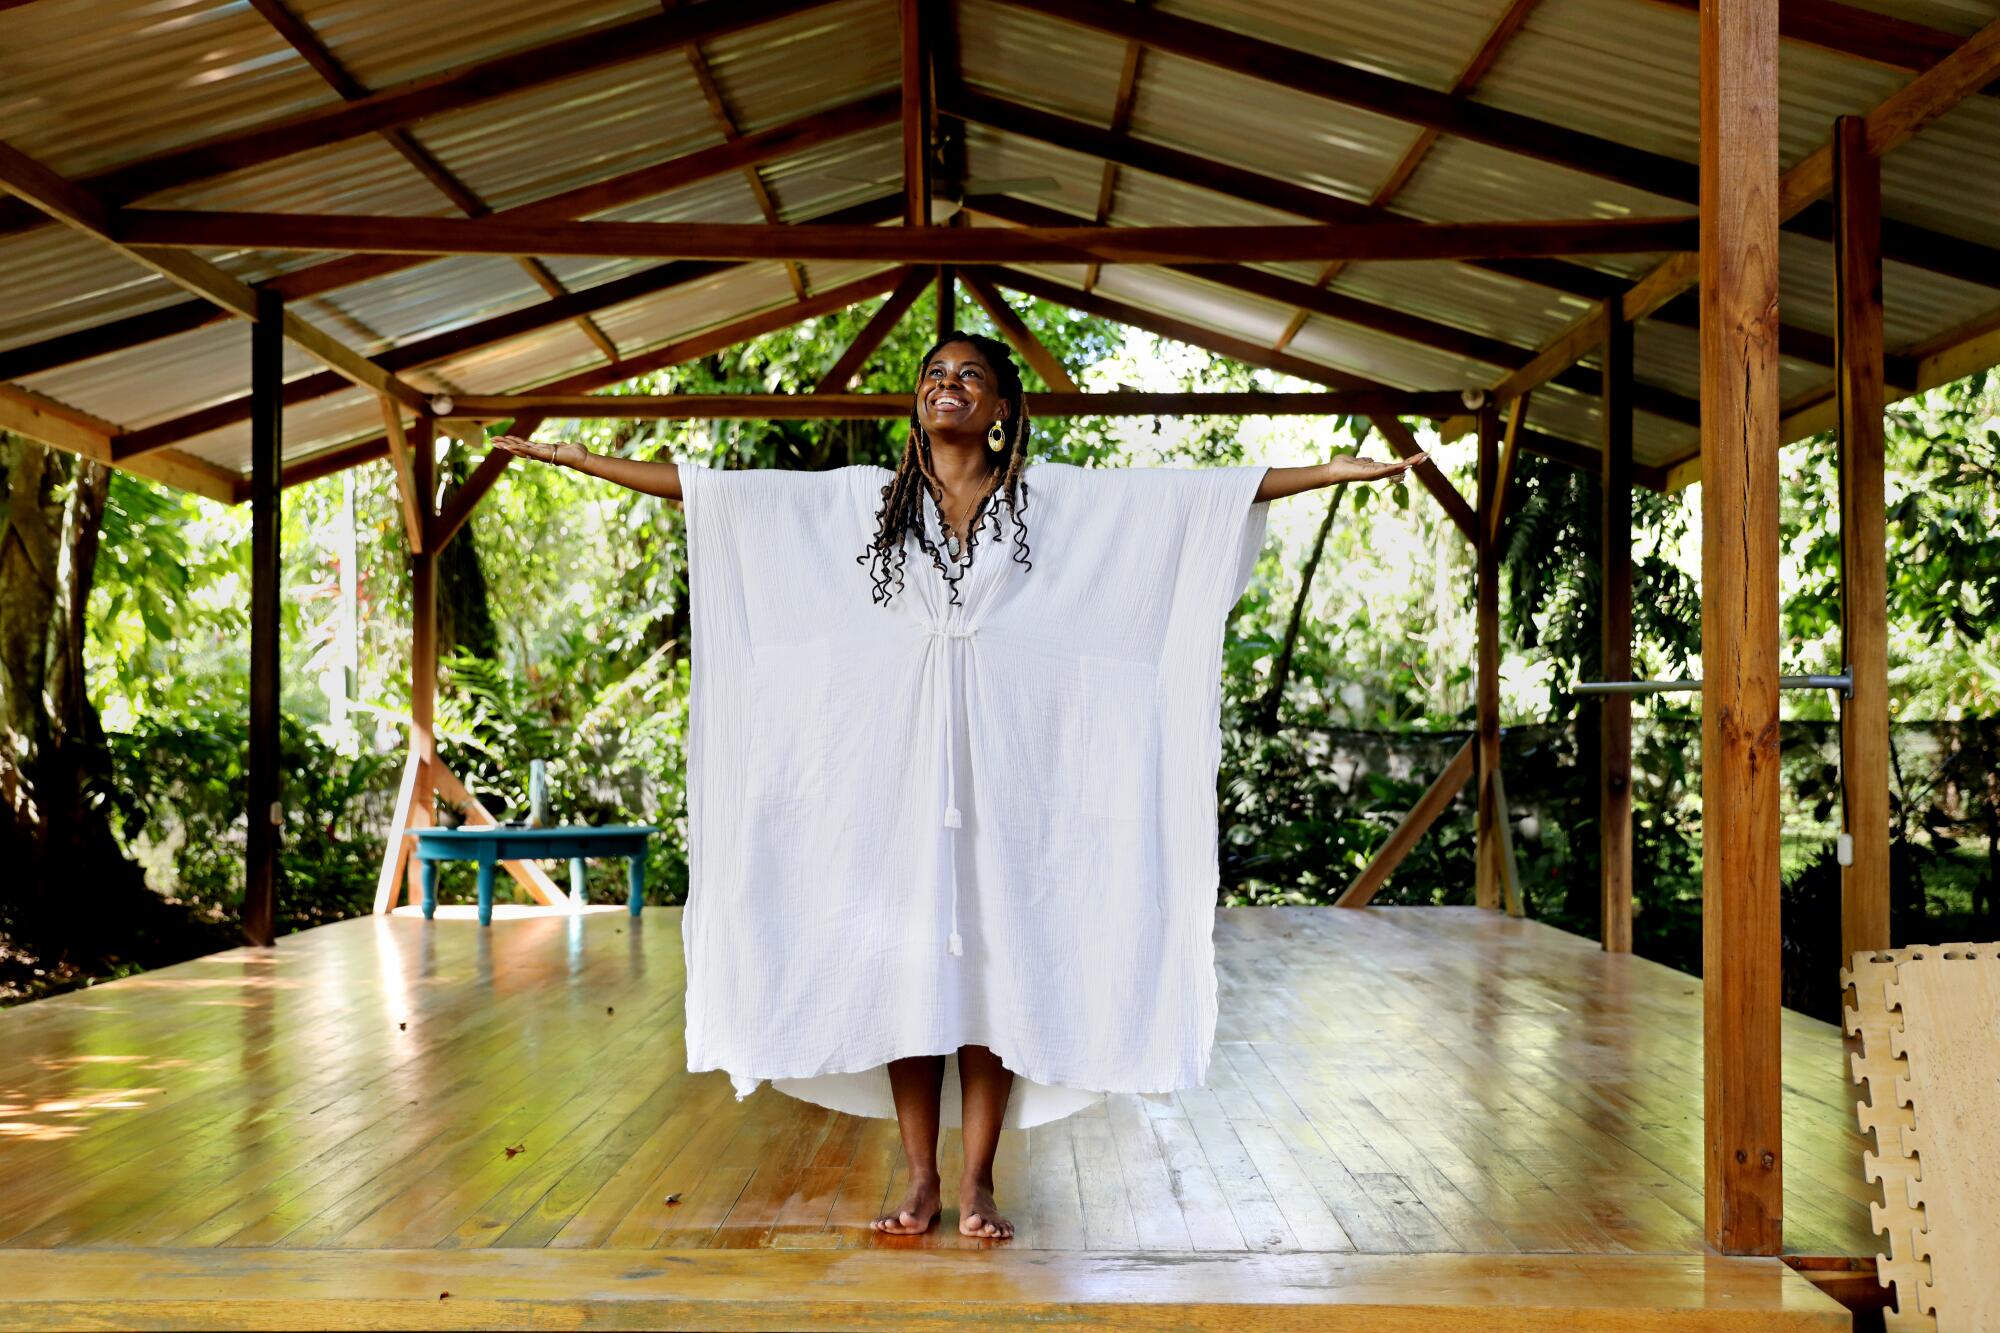 A Black woman spreads her arms while standing in Costa Rica.